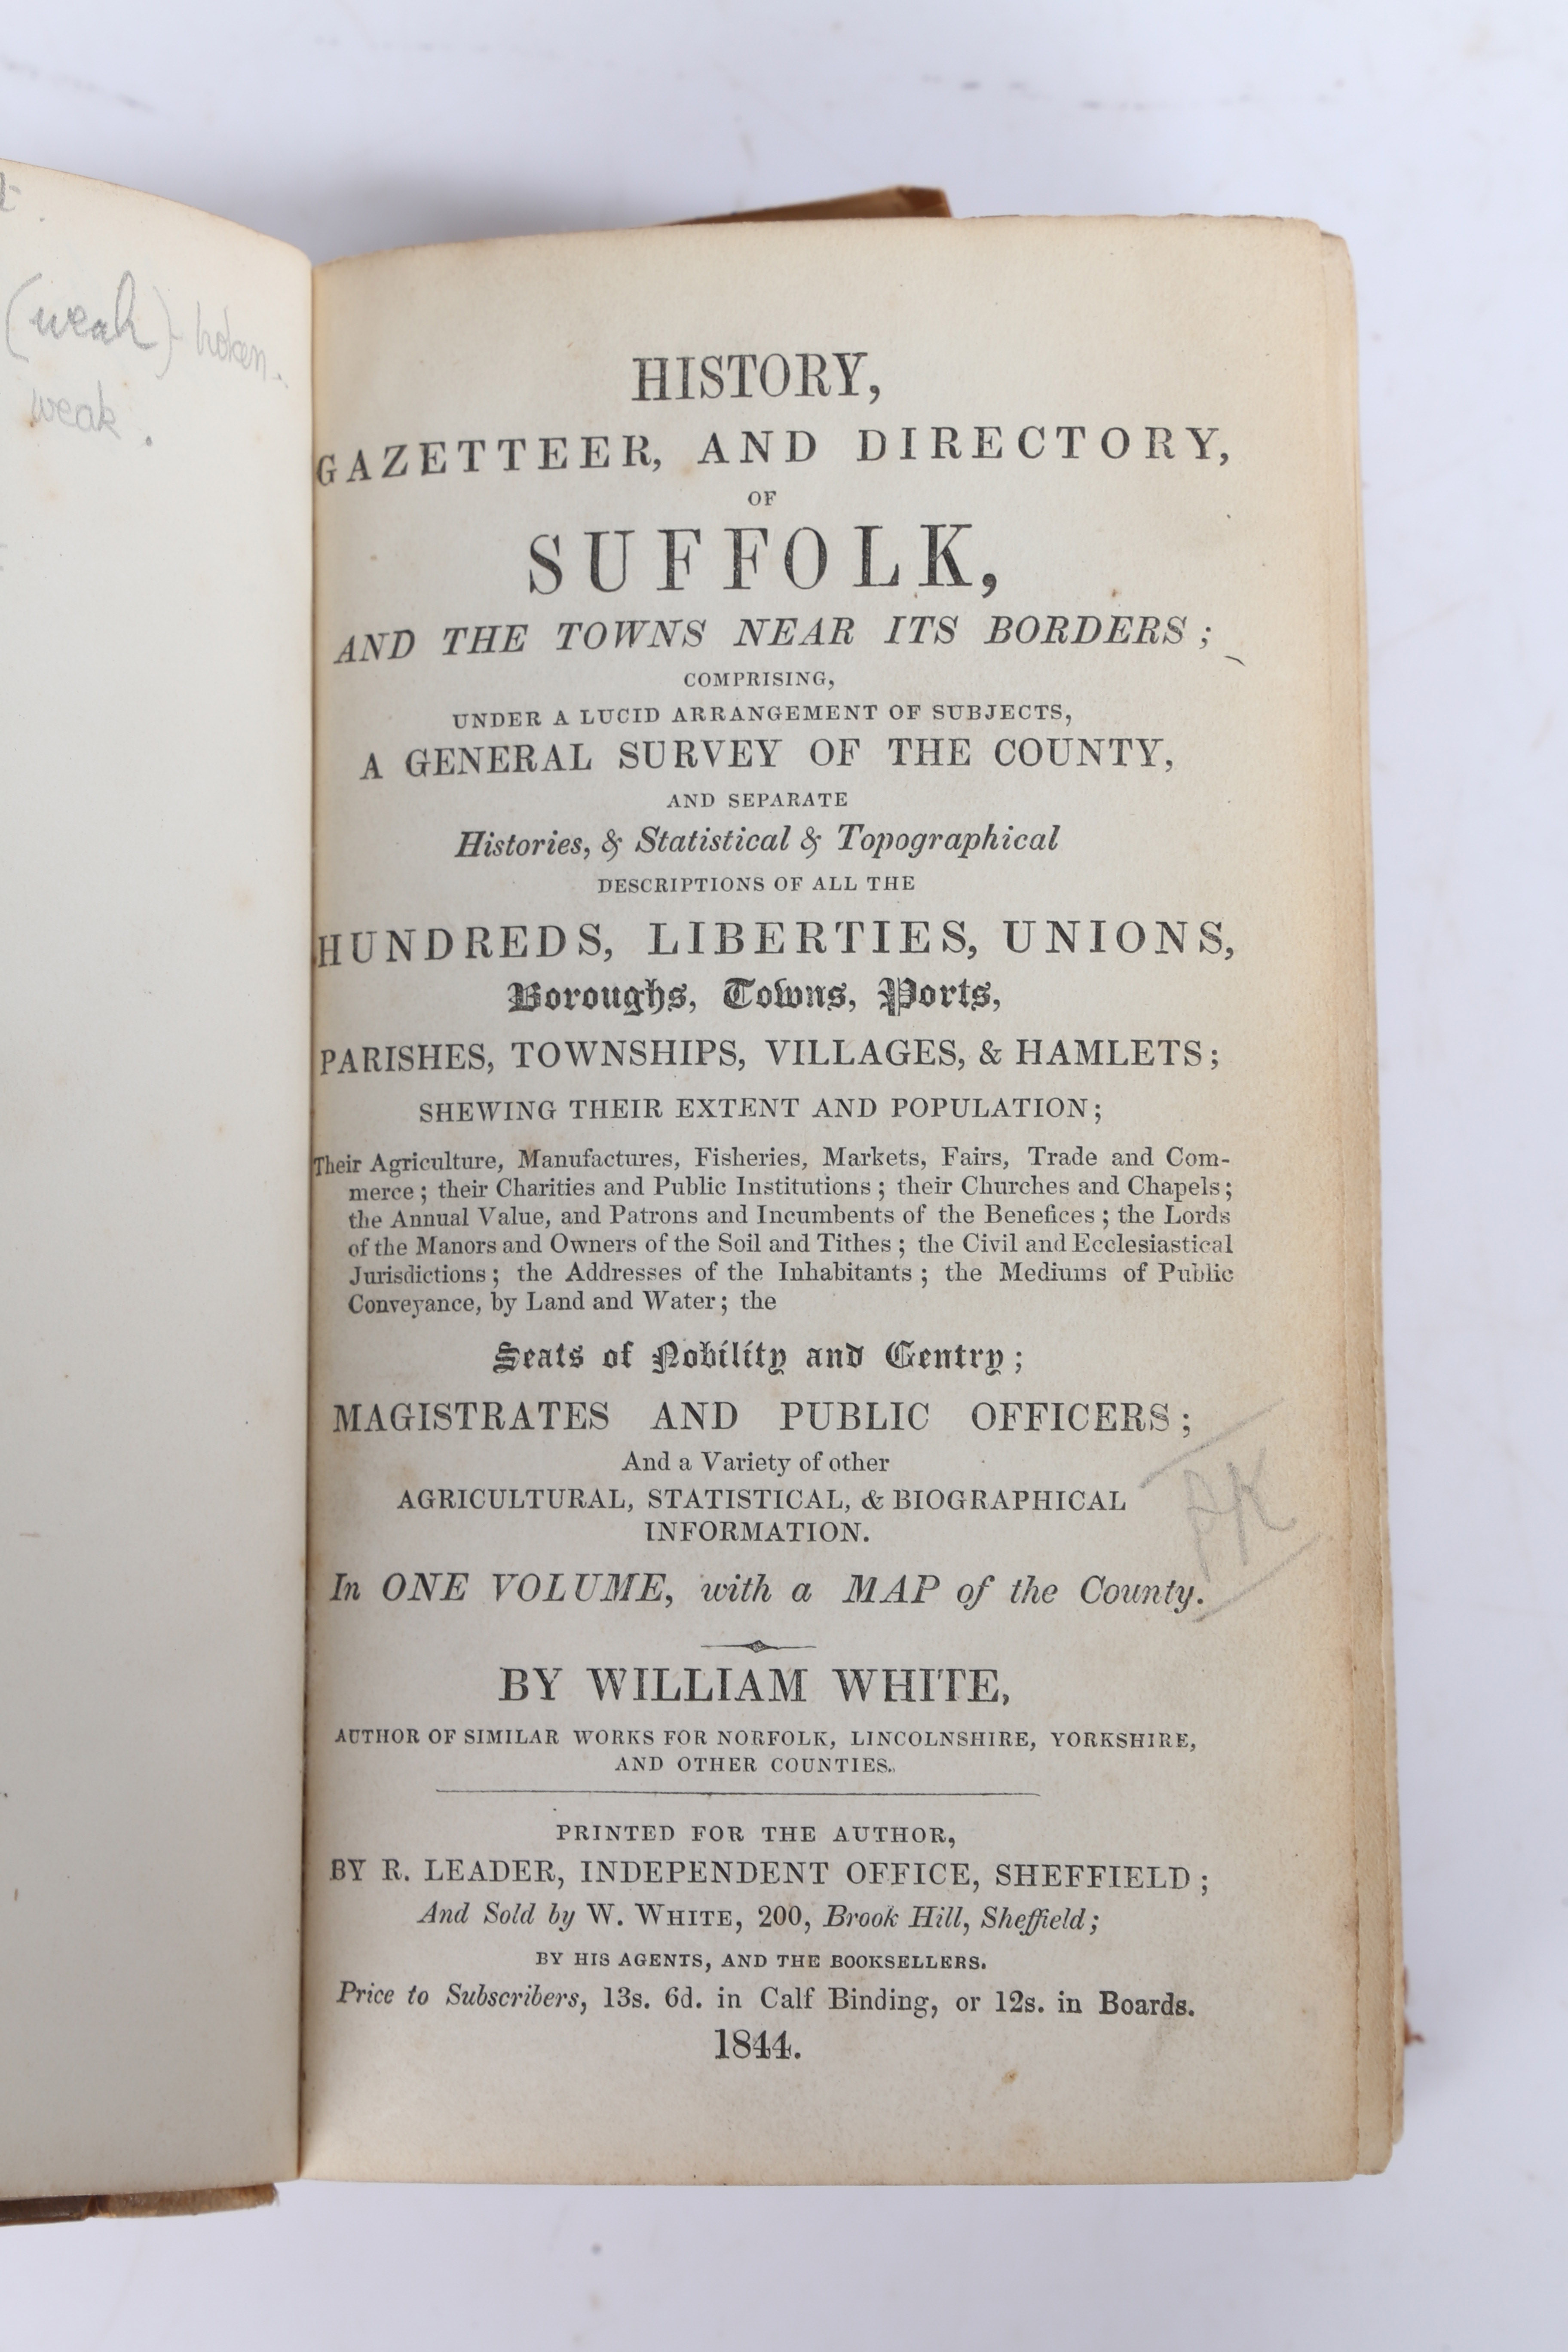 William White "History, Gazetteer, and Directory, of Suffolk, and the Towns near its Borders" - Image 5 of 5